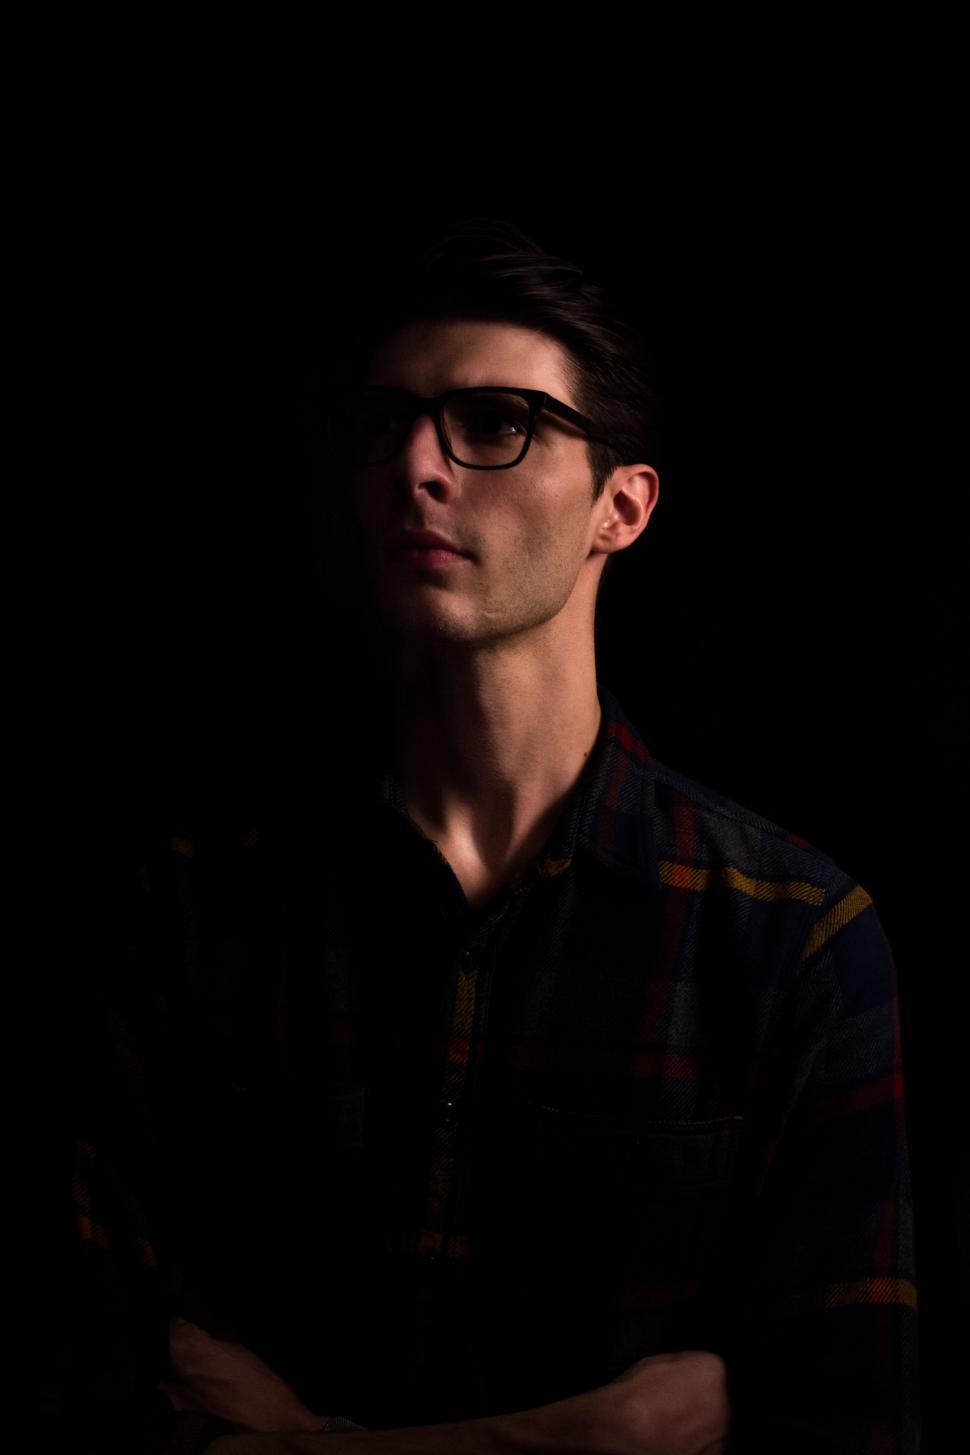 Free Image of Man With Glasses Standing in the Dark 